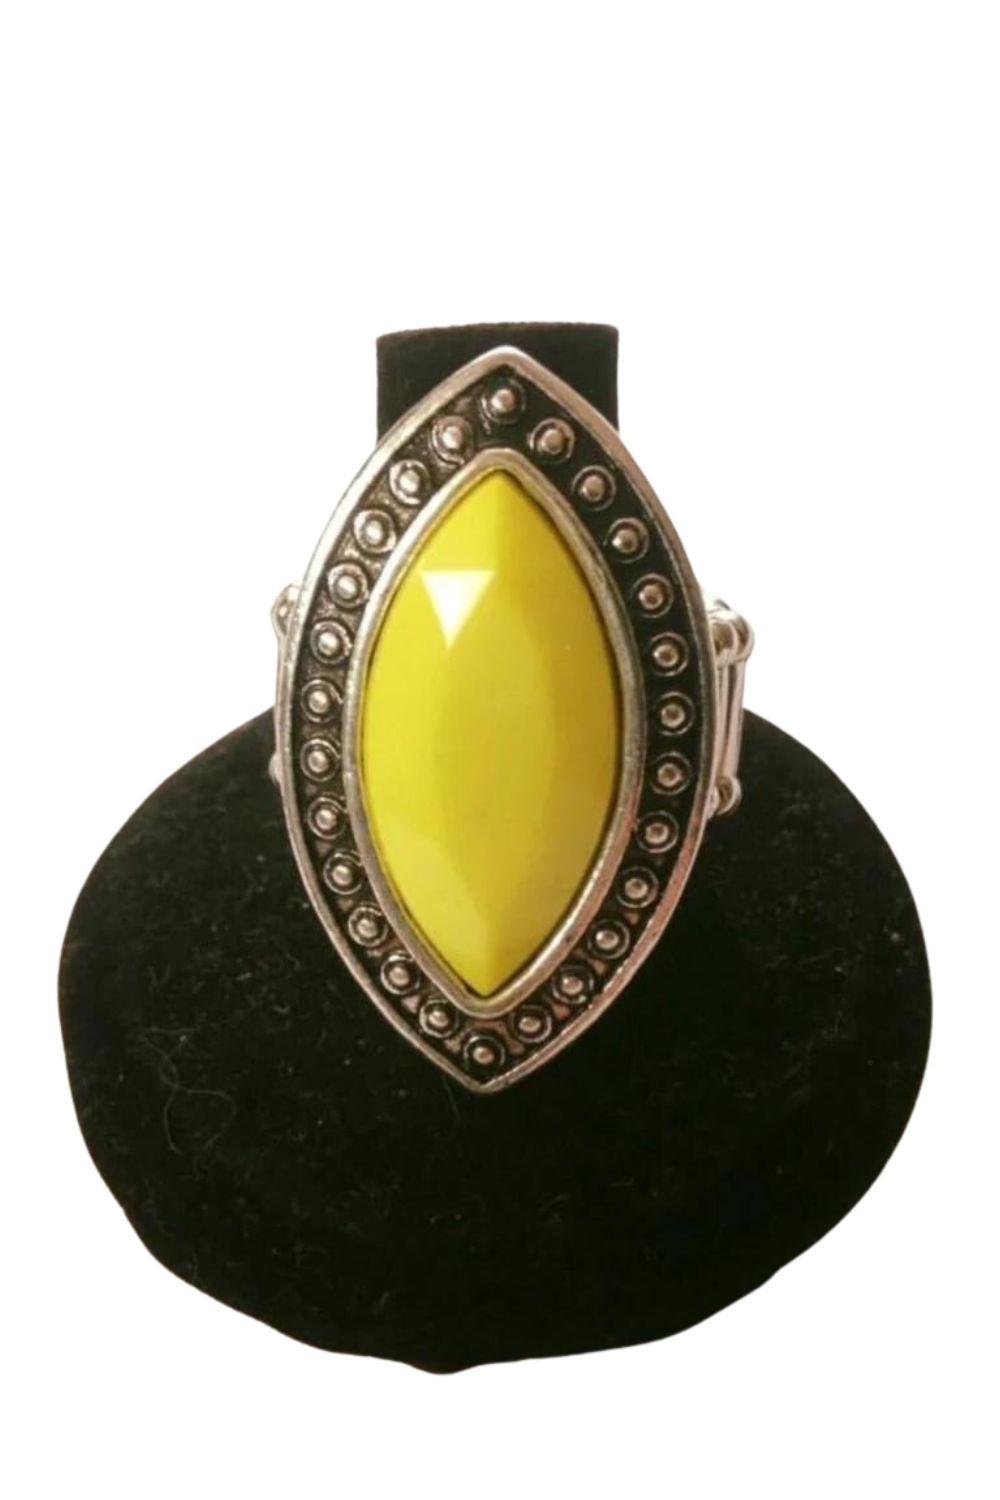 Serenely Sahara Yellow Ring - Paparazzi Accessories- on model - CarasShop.com - $5 Jewelry by Cara Jewels